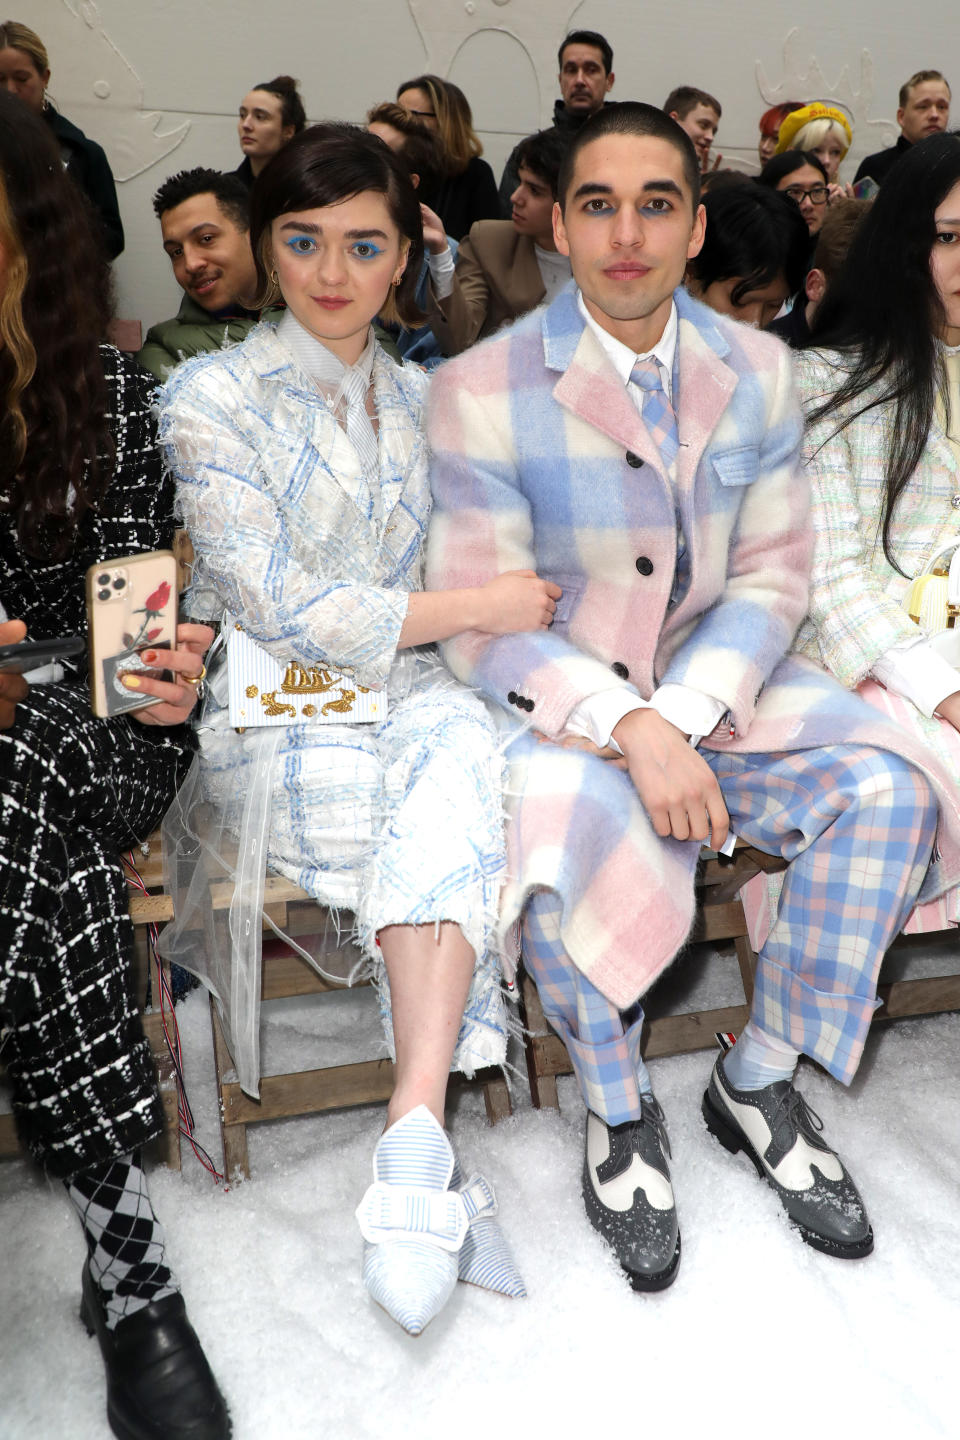 Maisie Williams and Reuben Selby attend the Thom Browne fall/winter 2020/2021 show during Paris Fashion Week on March 1.